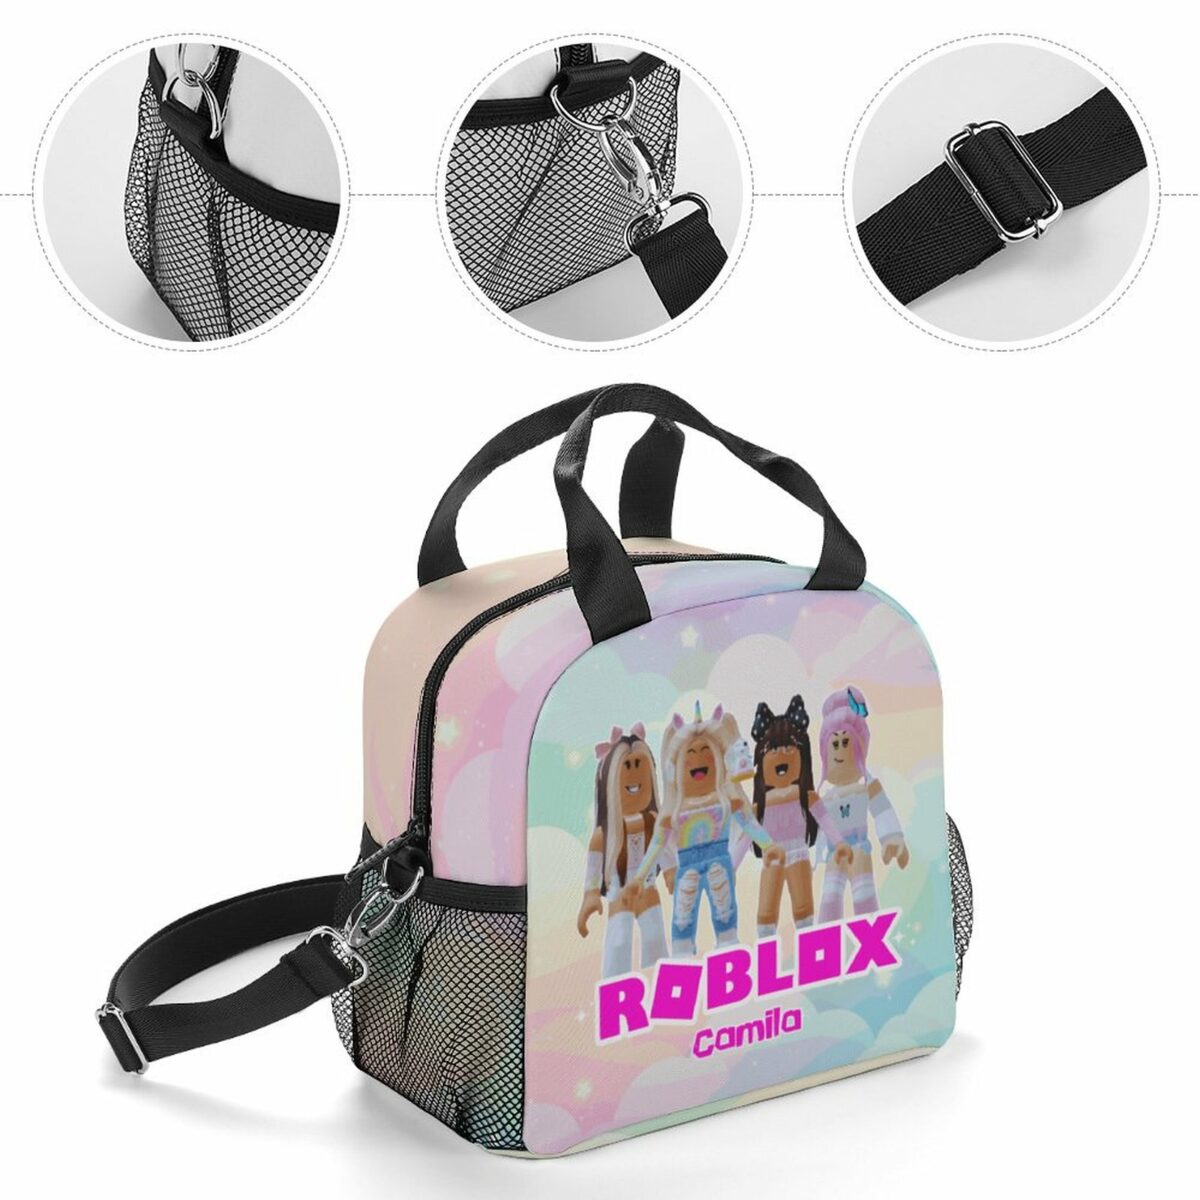 Customizable Name Roblox Girls Insulated Lunch Crossbody Bag with Strap for School, Beach, Picnic Cool Kiddo 18